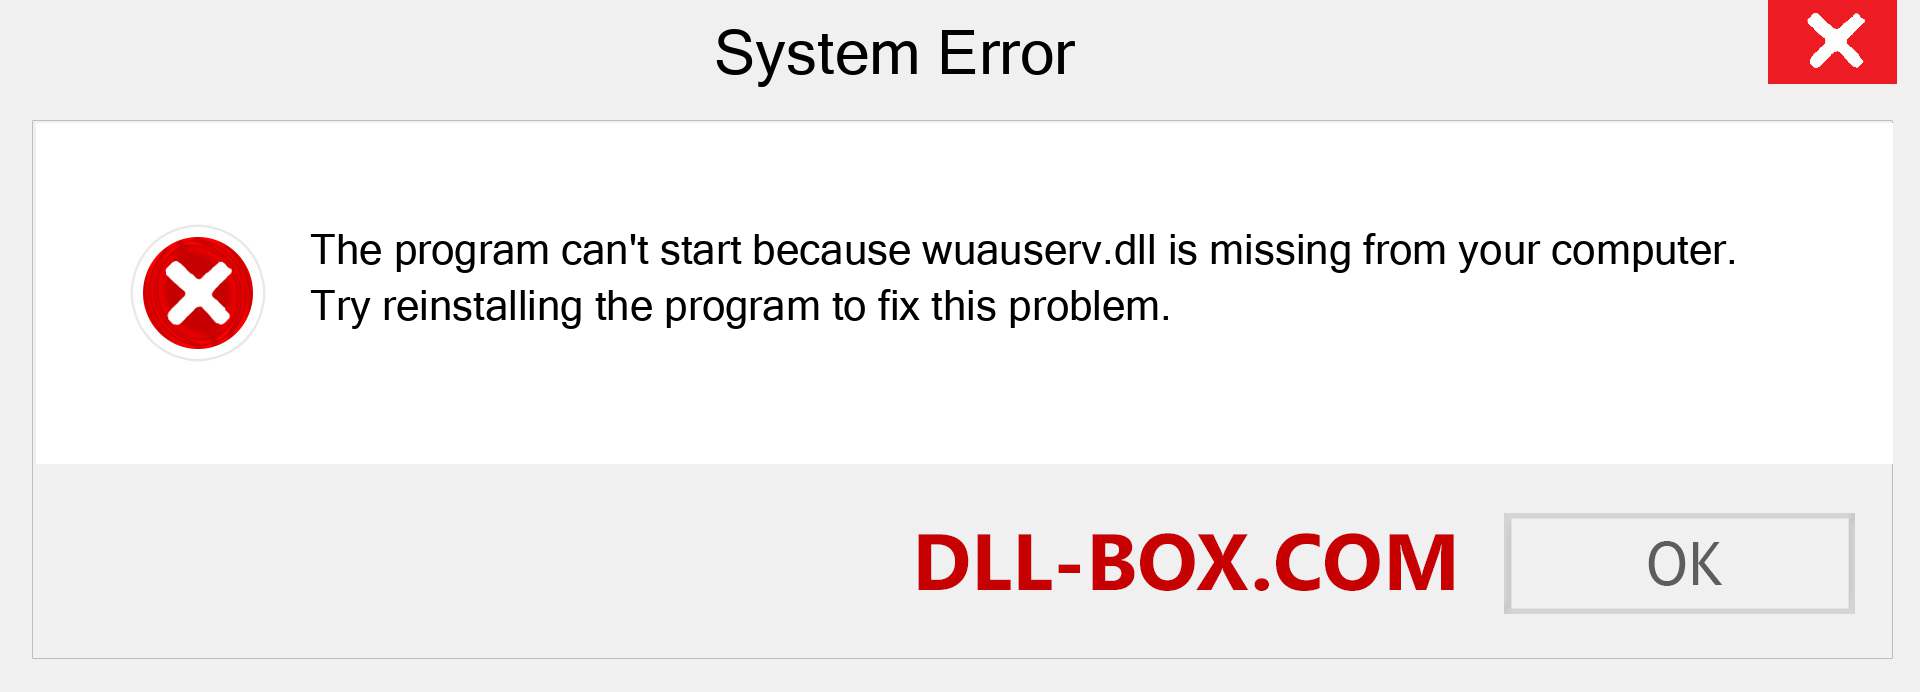  wuauserv.dll file is missing?. Download for Windows 7, 8, 10 - Fix  wuauserv dll Missing Error on Windows, photos, images